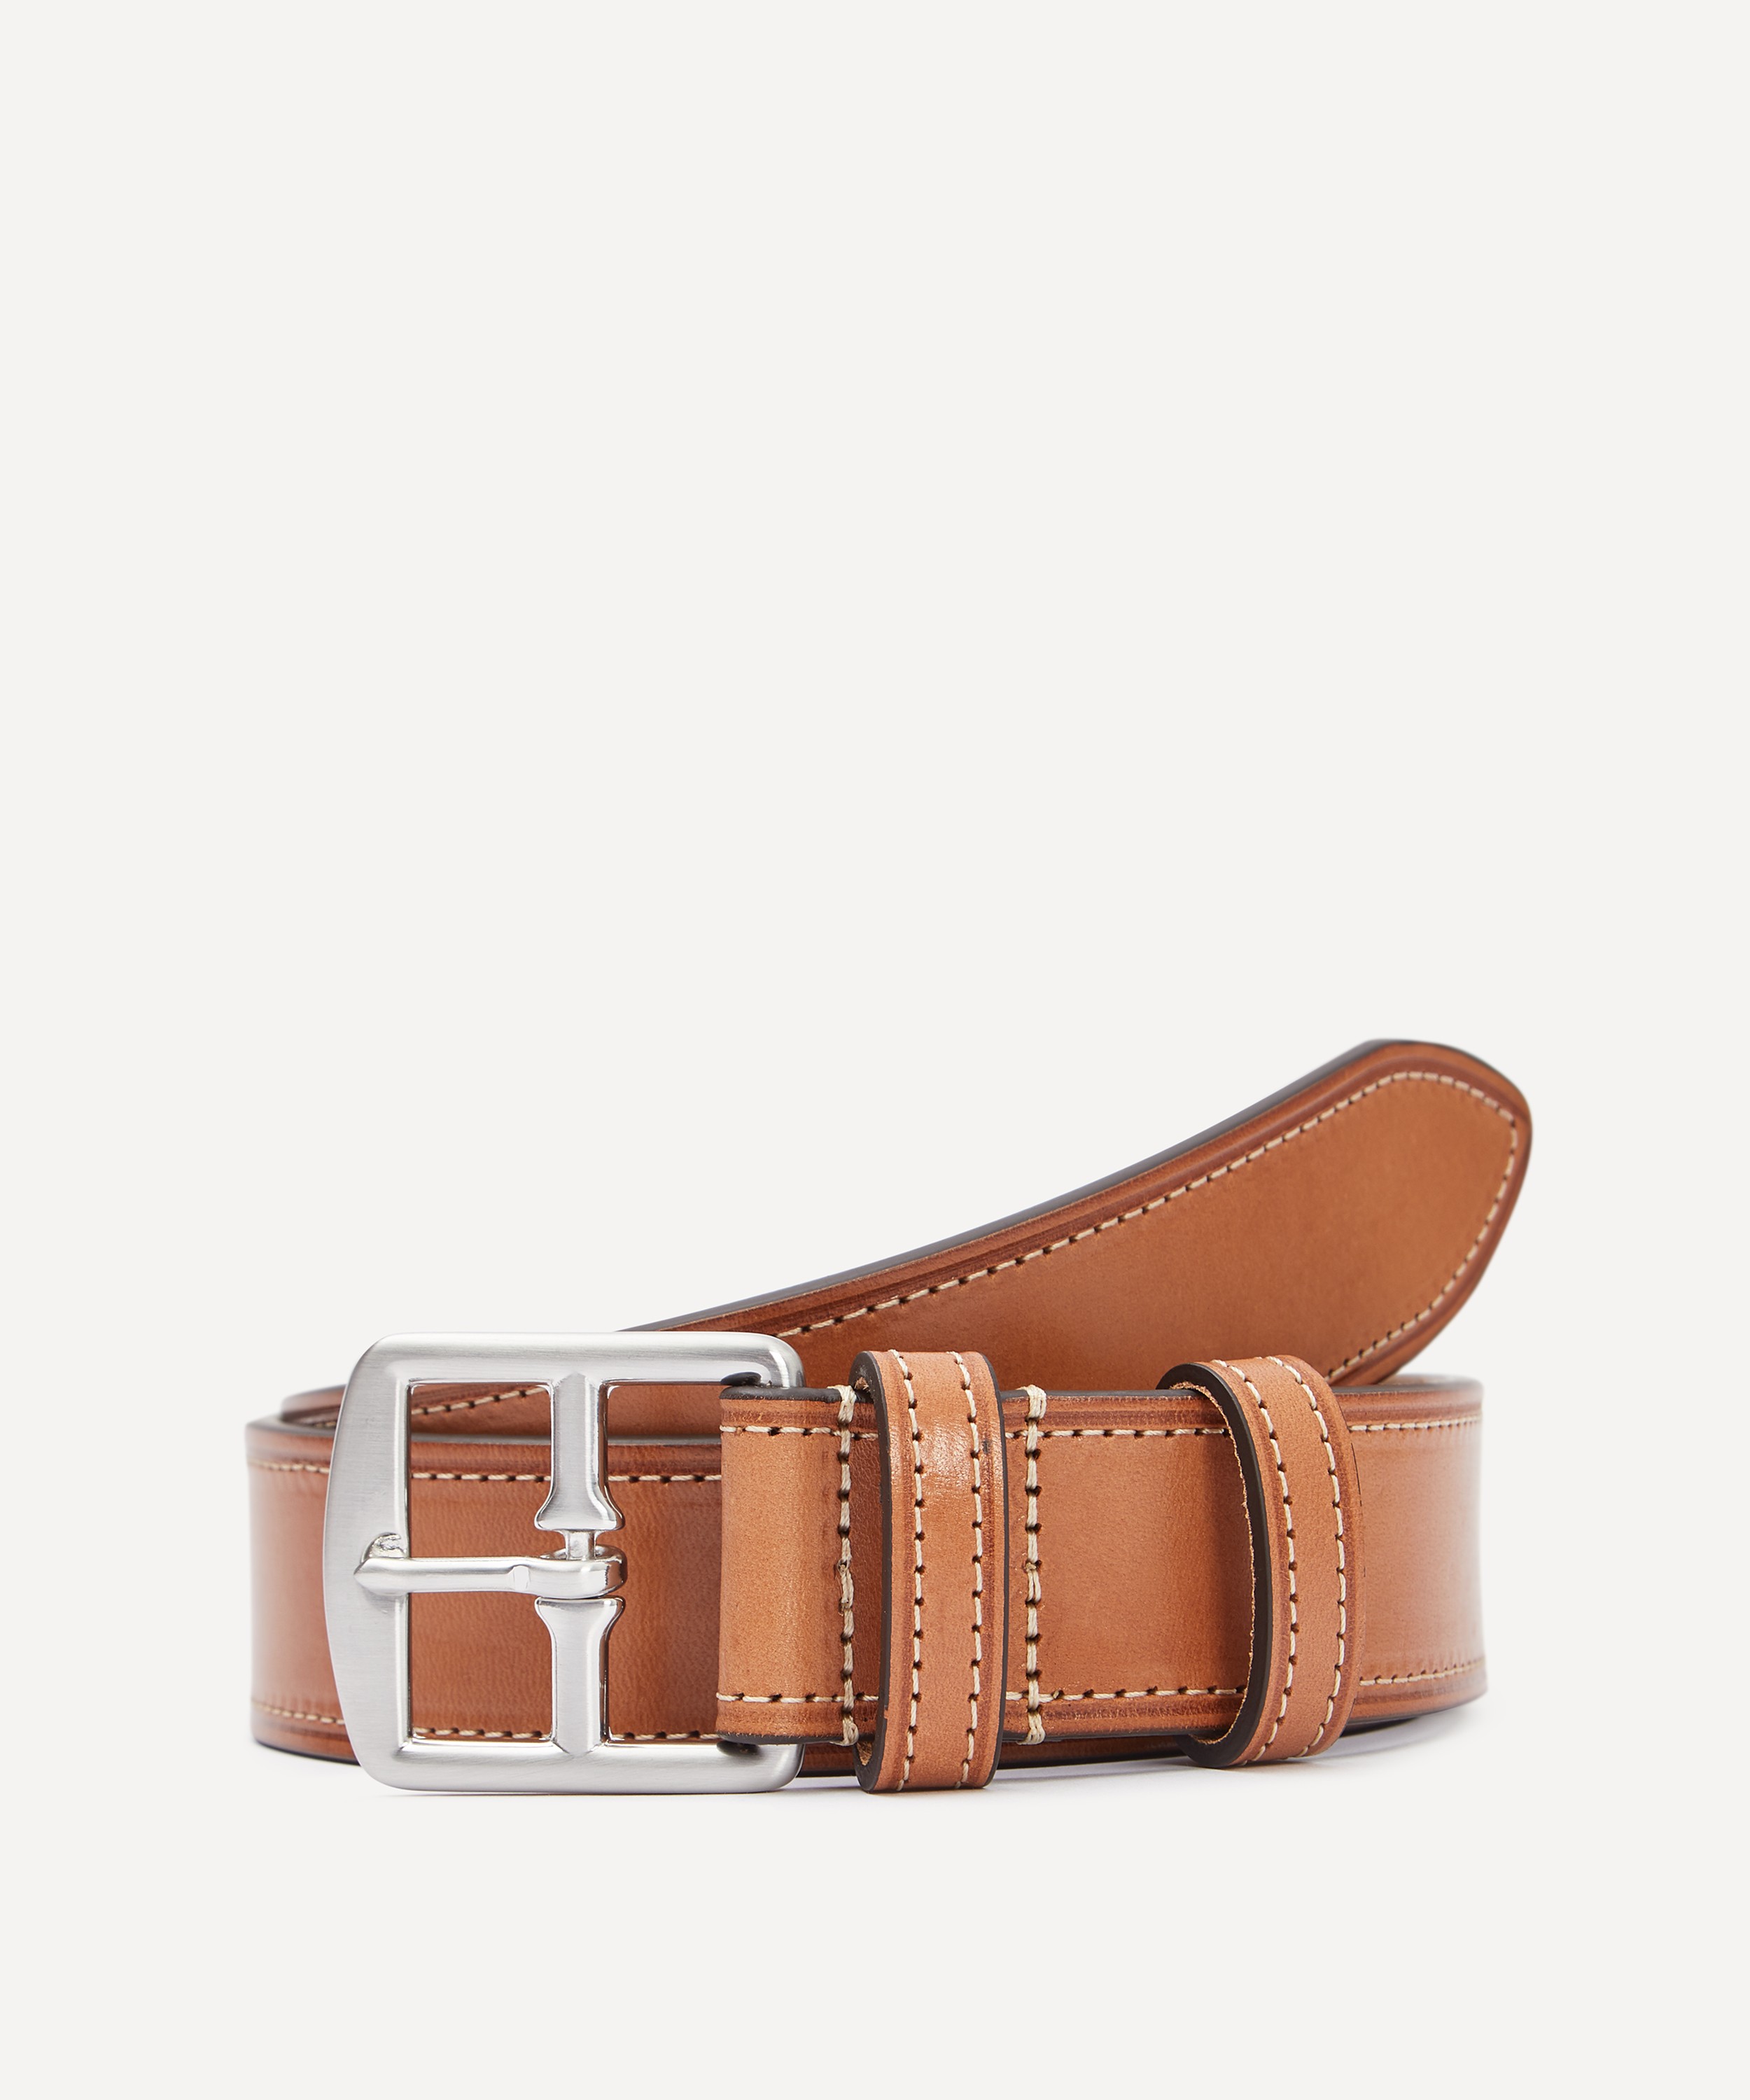 Anderson's Narrow Woven Leather Belt